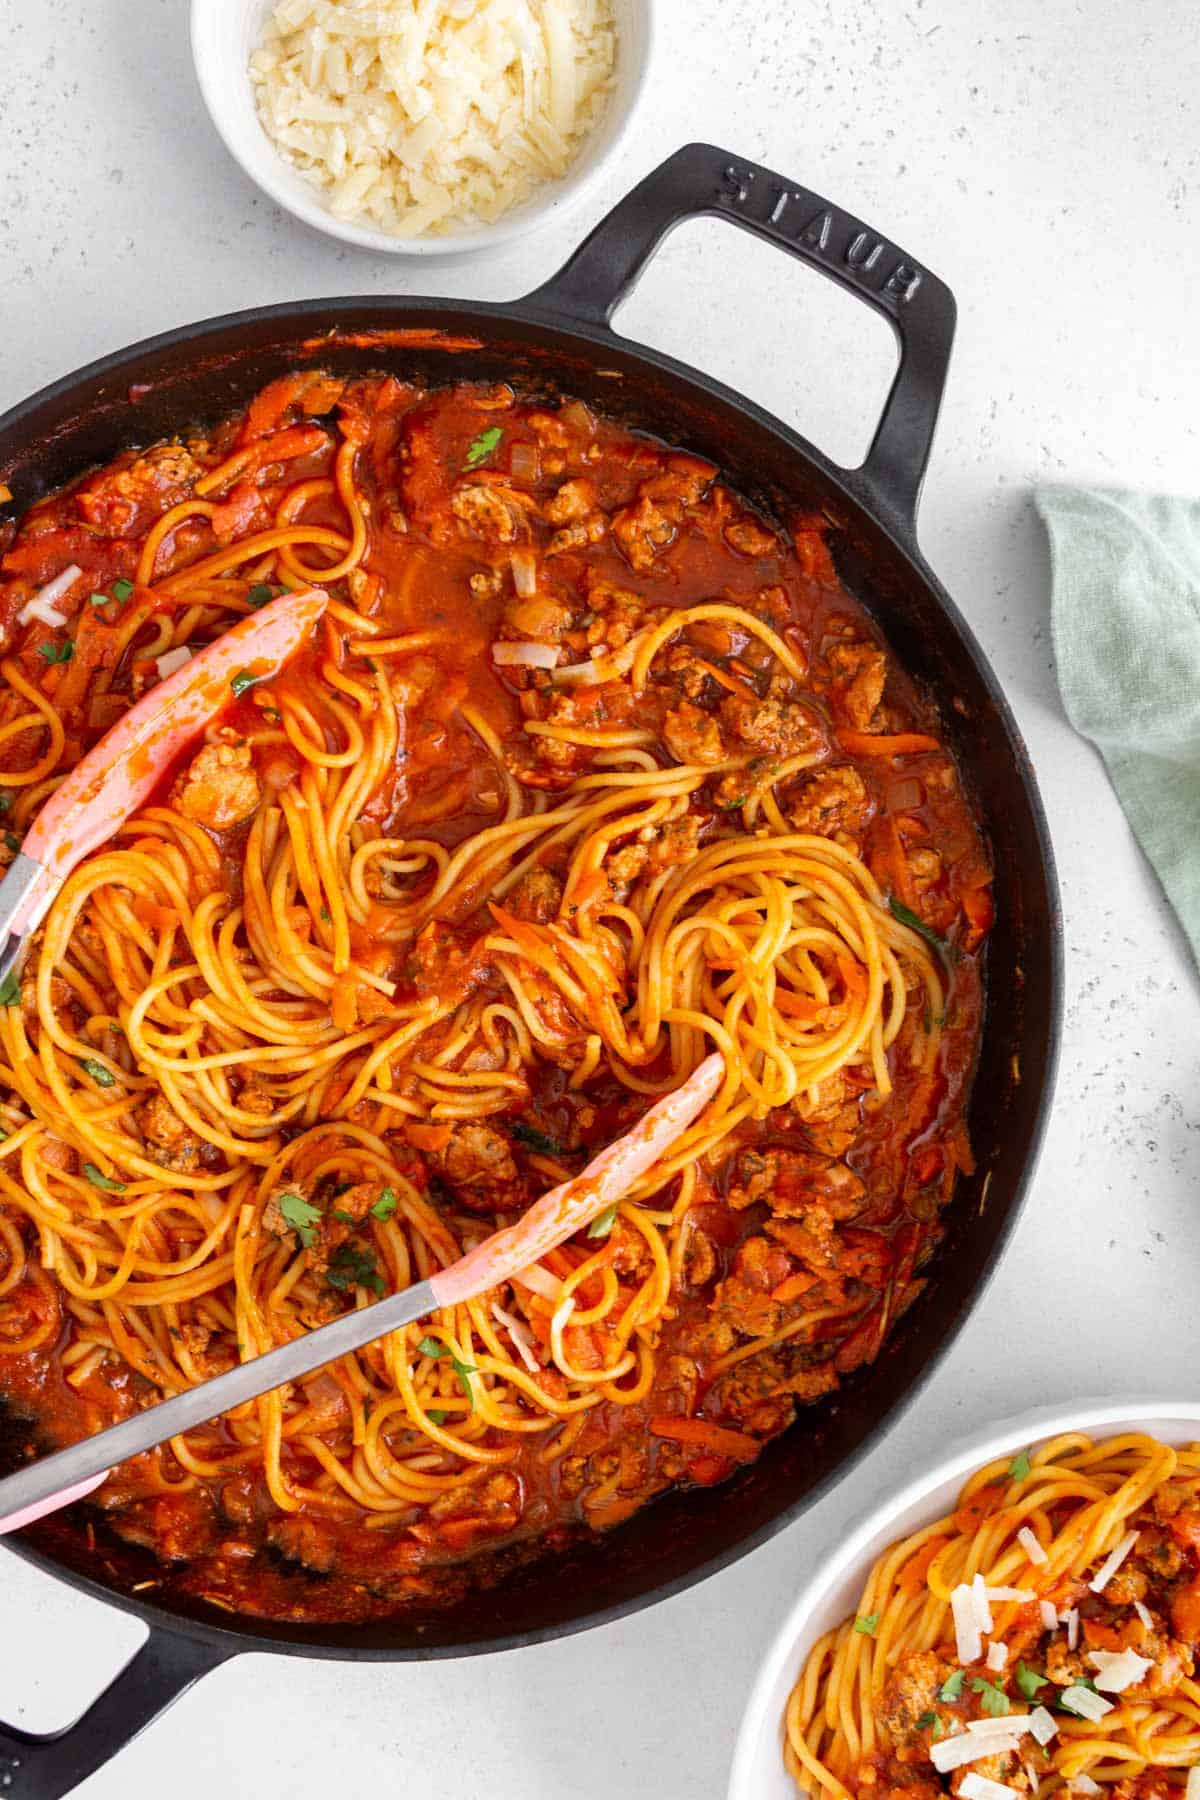 Overhead view of a skillet of one pot spaghetti with meat sauce with a pair of tongs in the skillet.